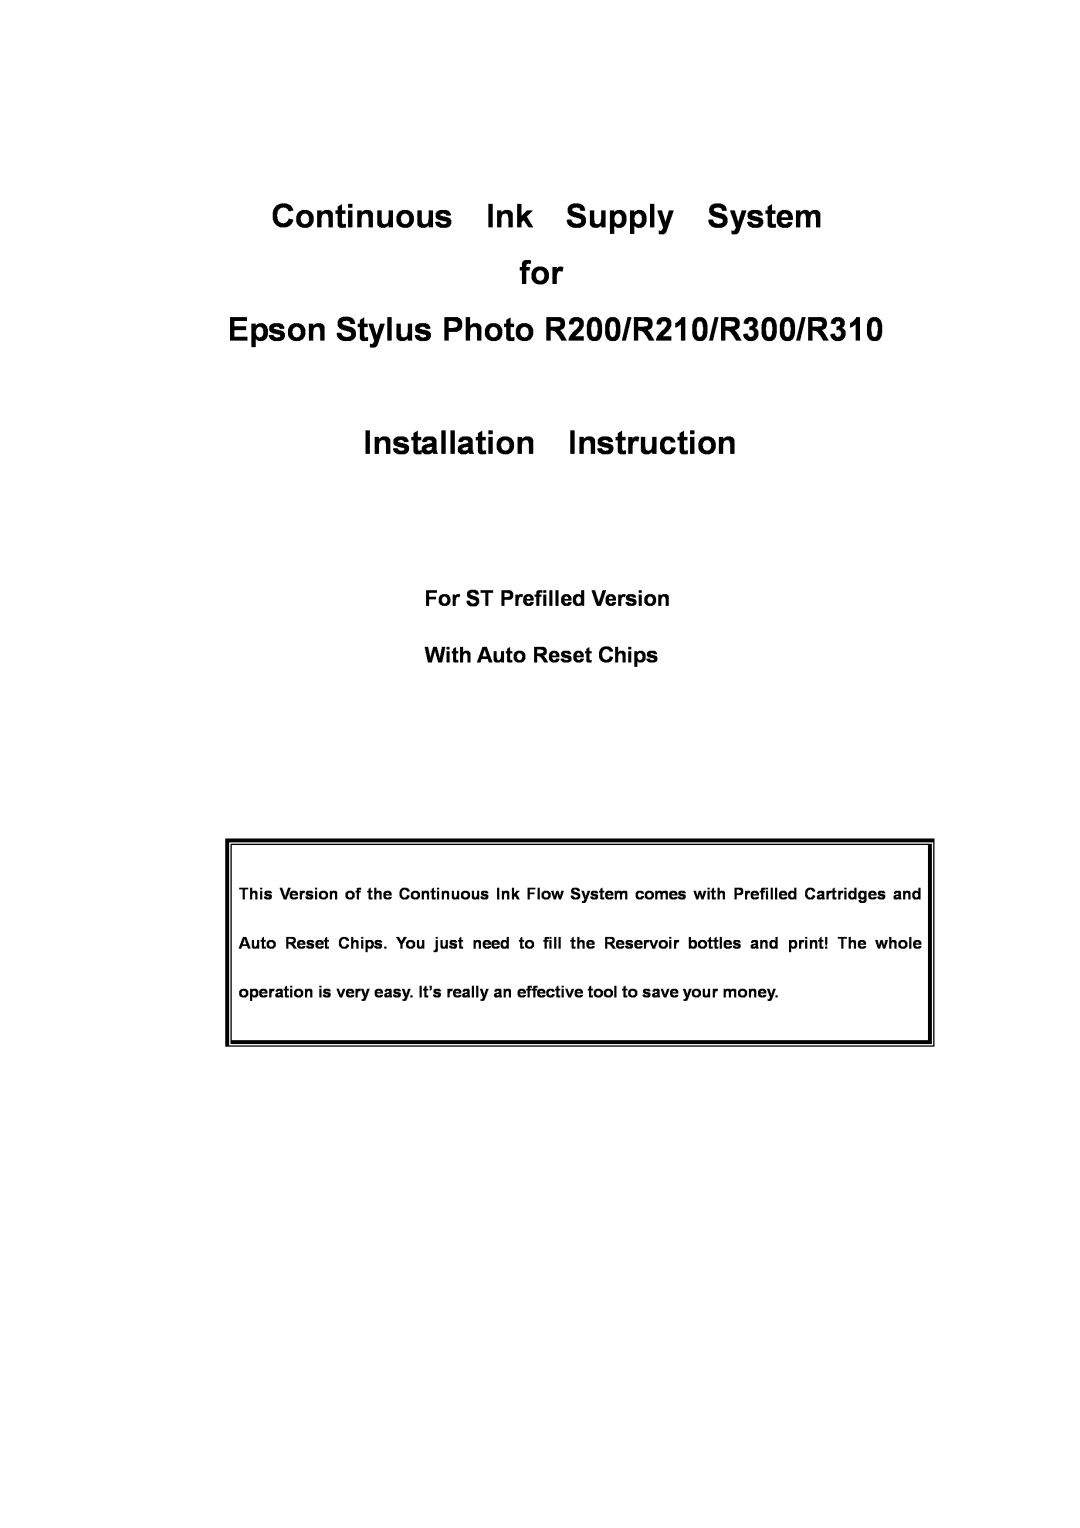 Epson R210 manual For ST Prefilled Version With Auto Reset Chips, Continuous Ink Supply System for 